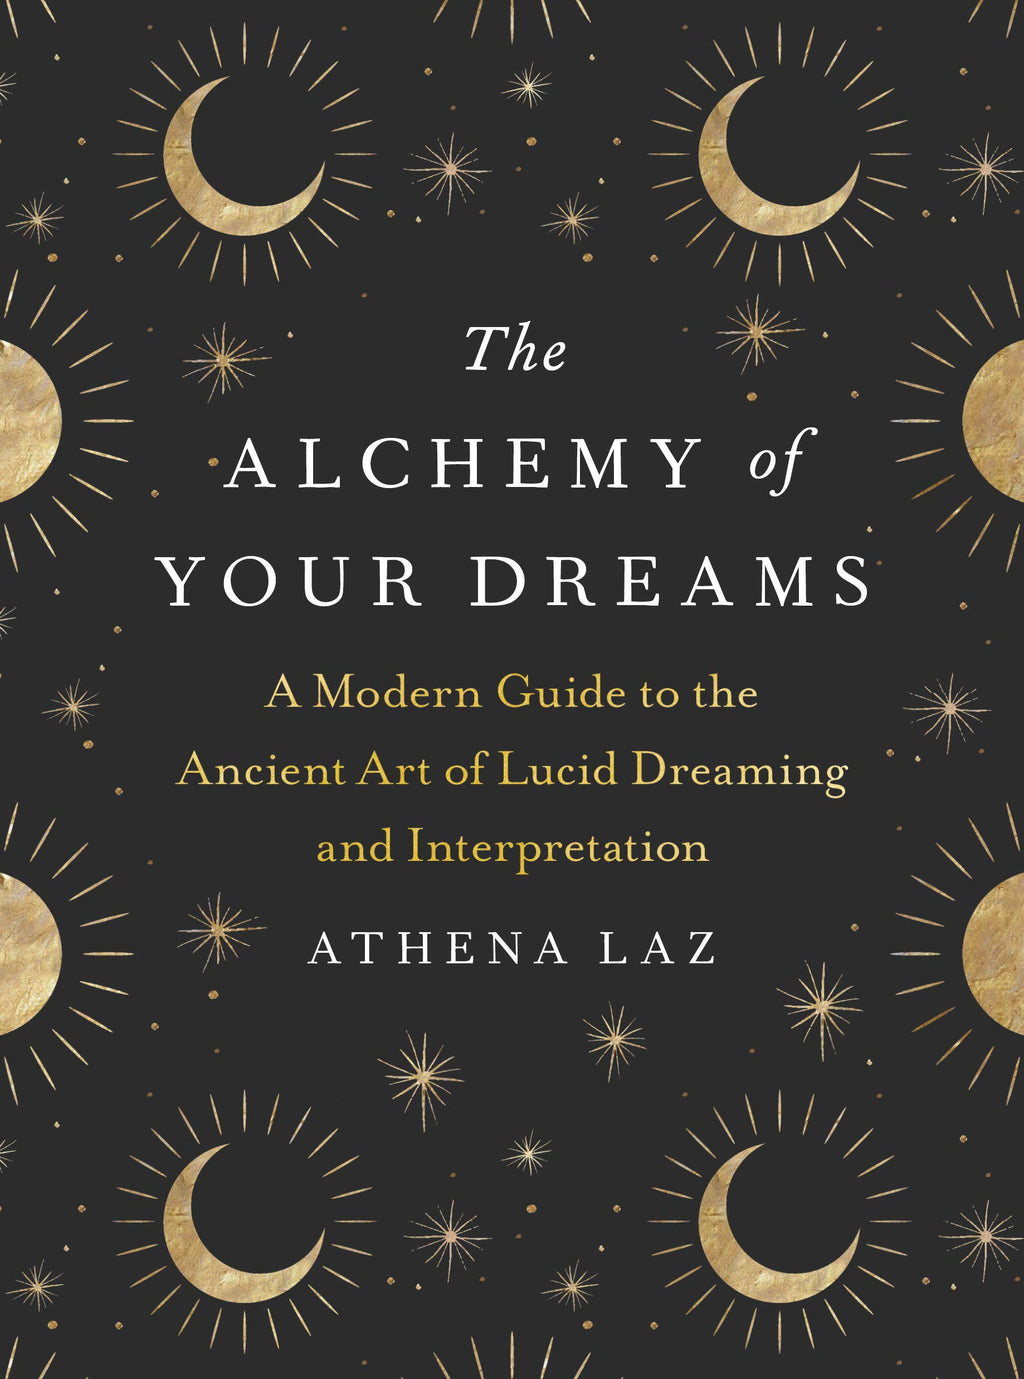 The Alchemy of Your Dreams - Lighten Up Shop